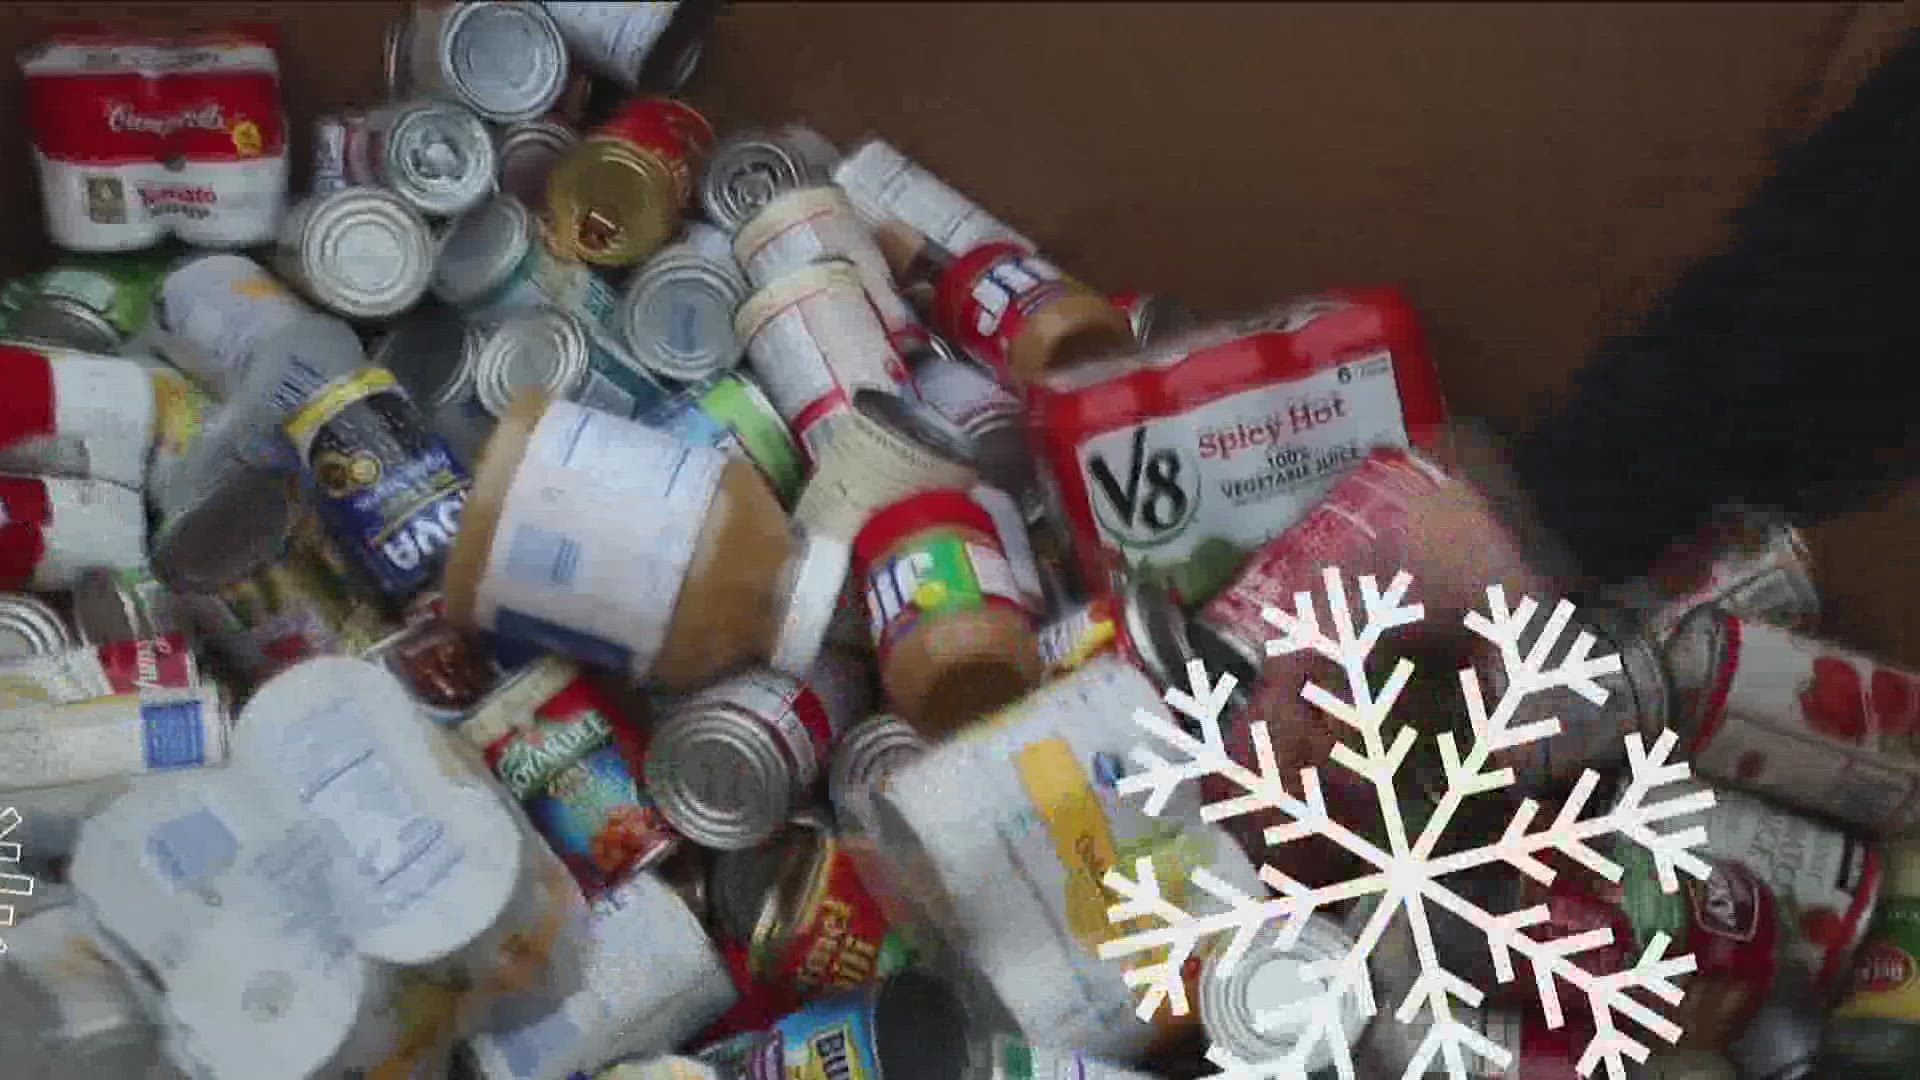 11Alive conducts the annual Can-A-Thon to help fight hunger during the holidays. Our goal is to collect 300,000 cans on this special anniversary.